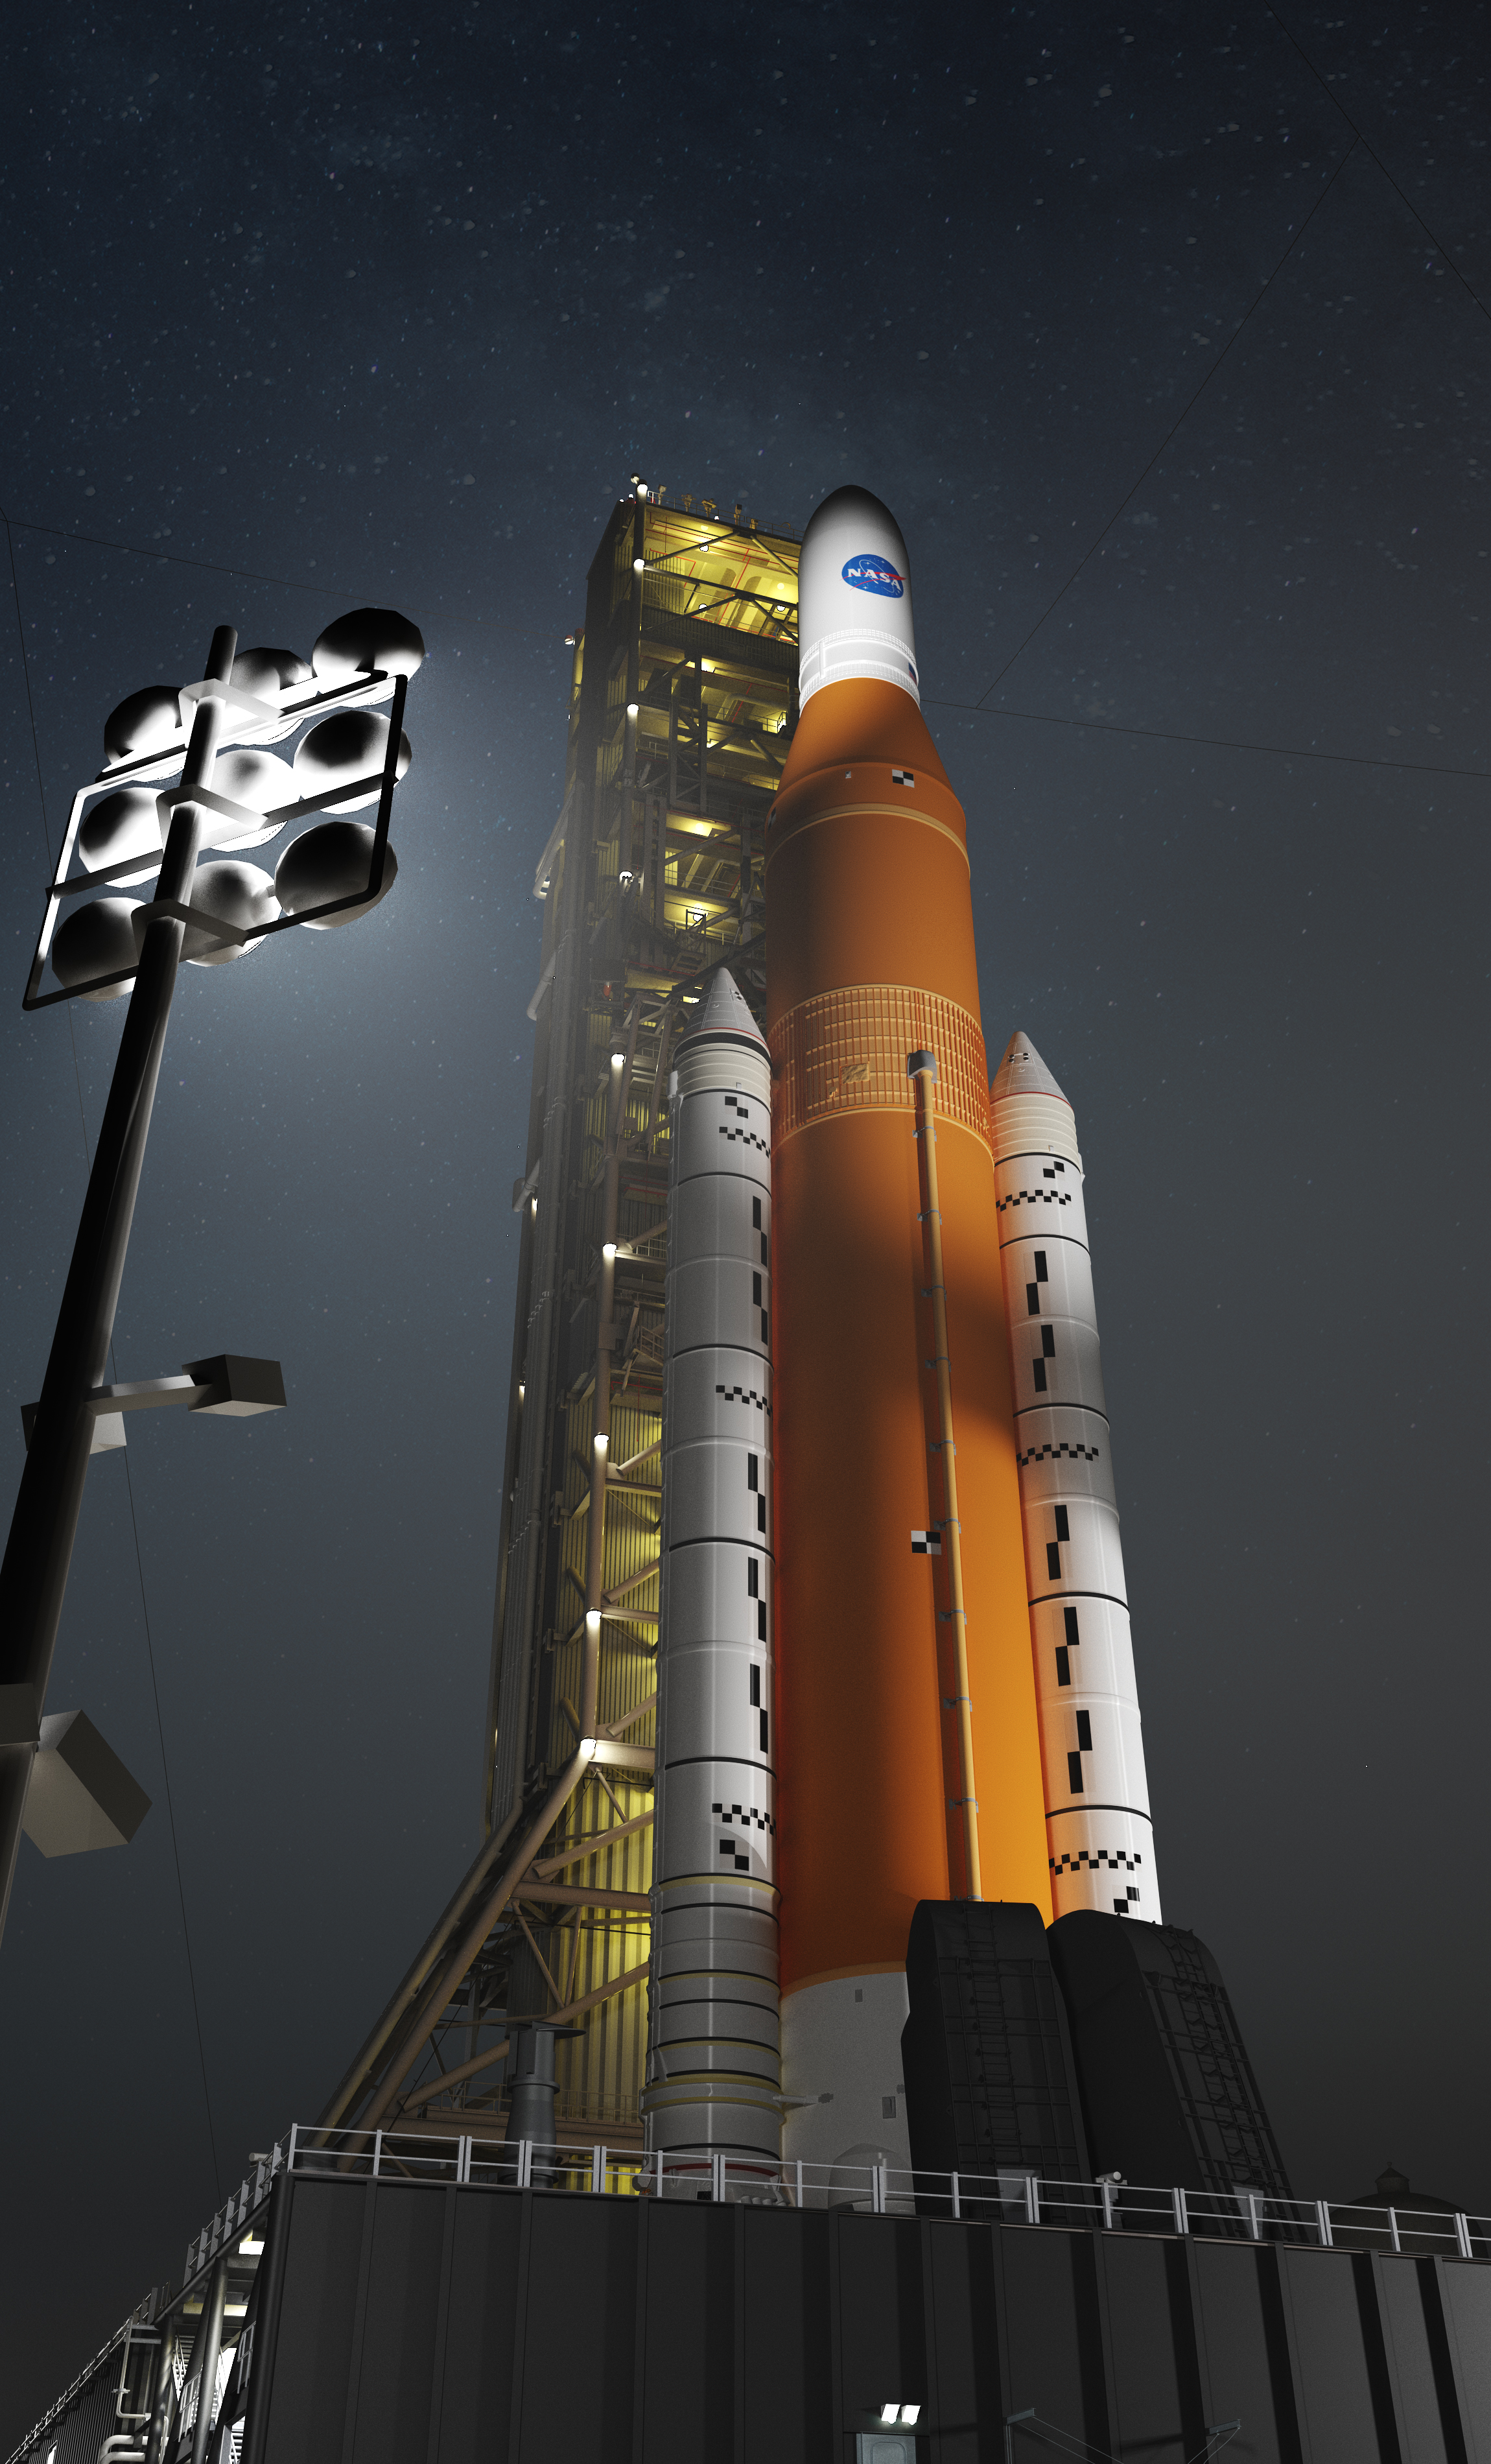 Nighttime view of SLS on mobile launcher